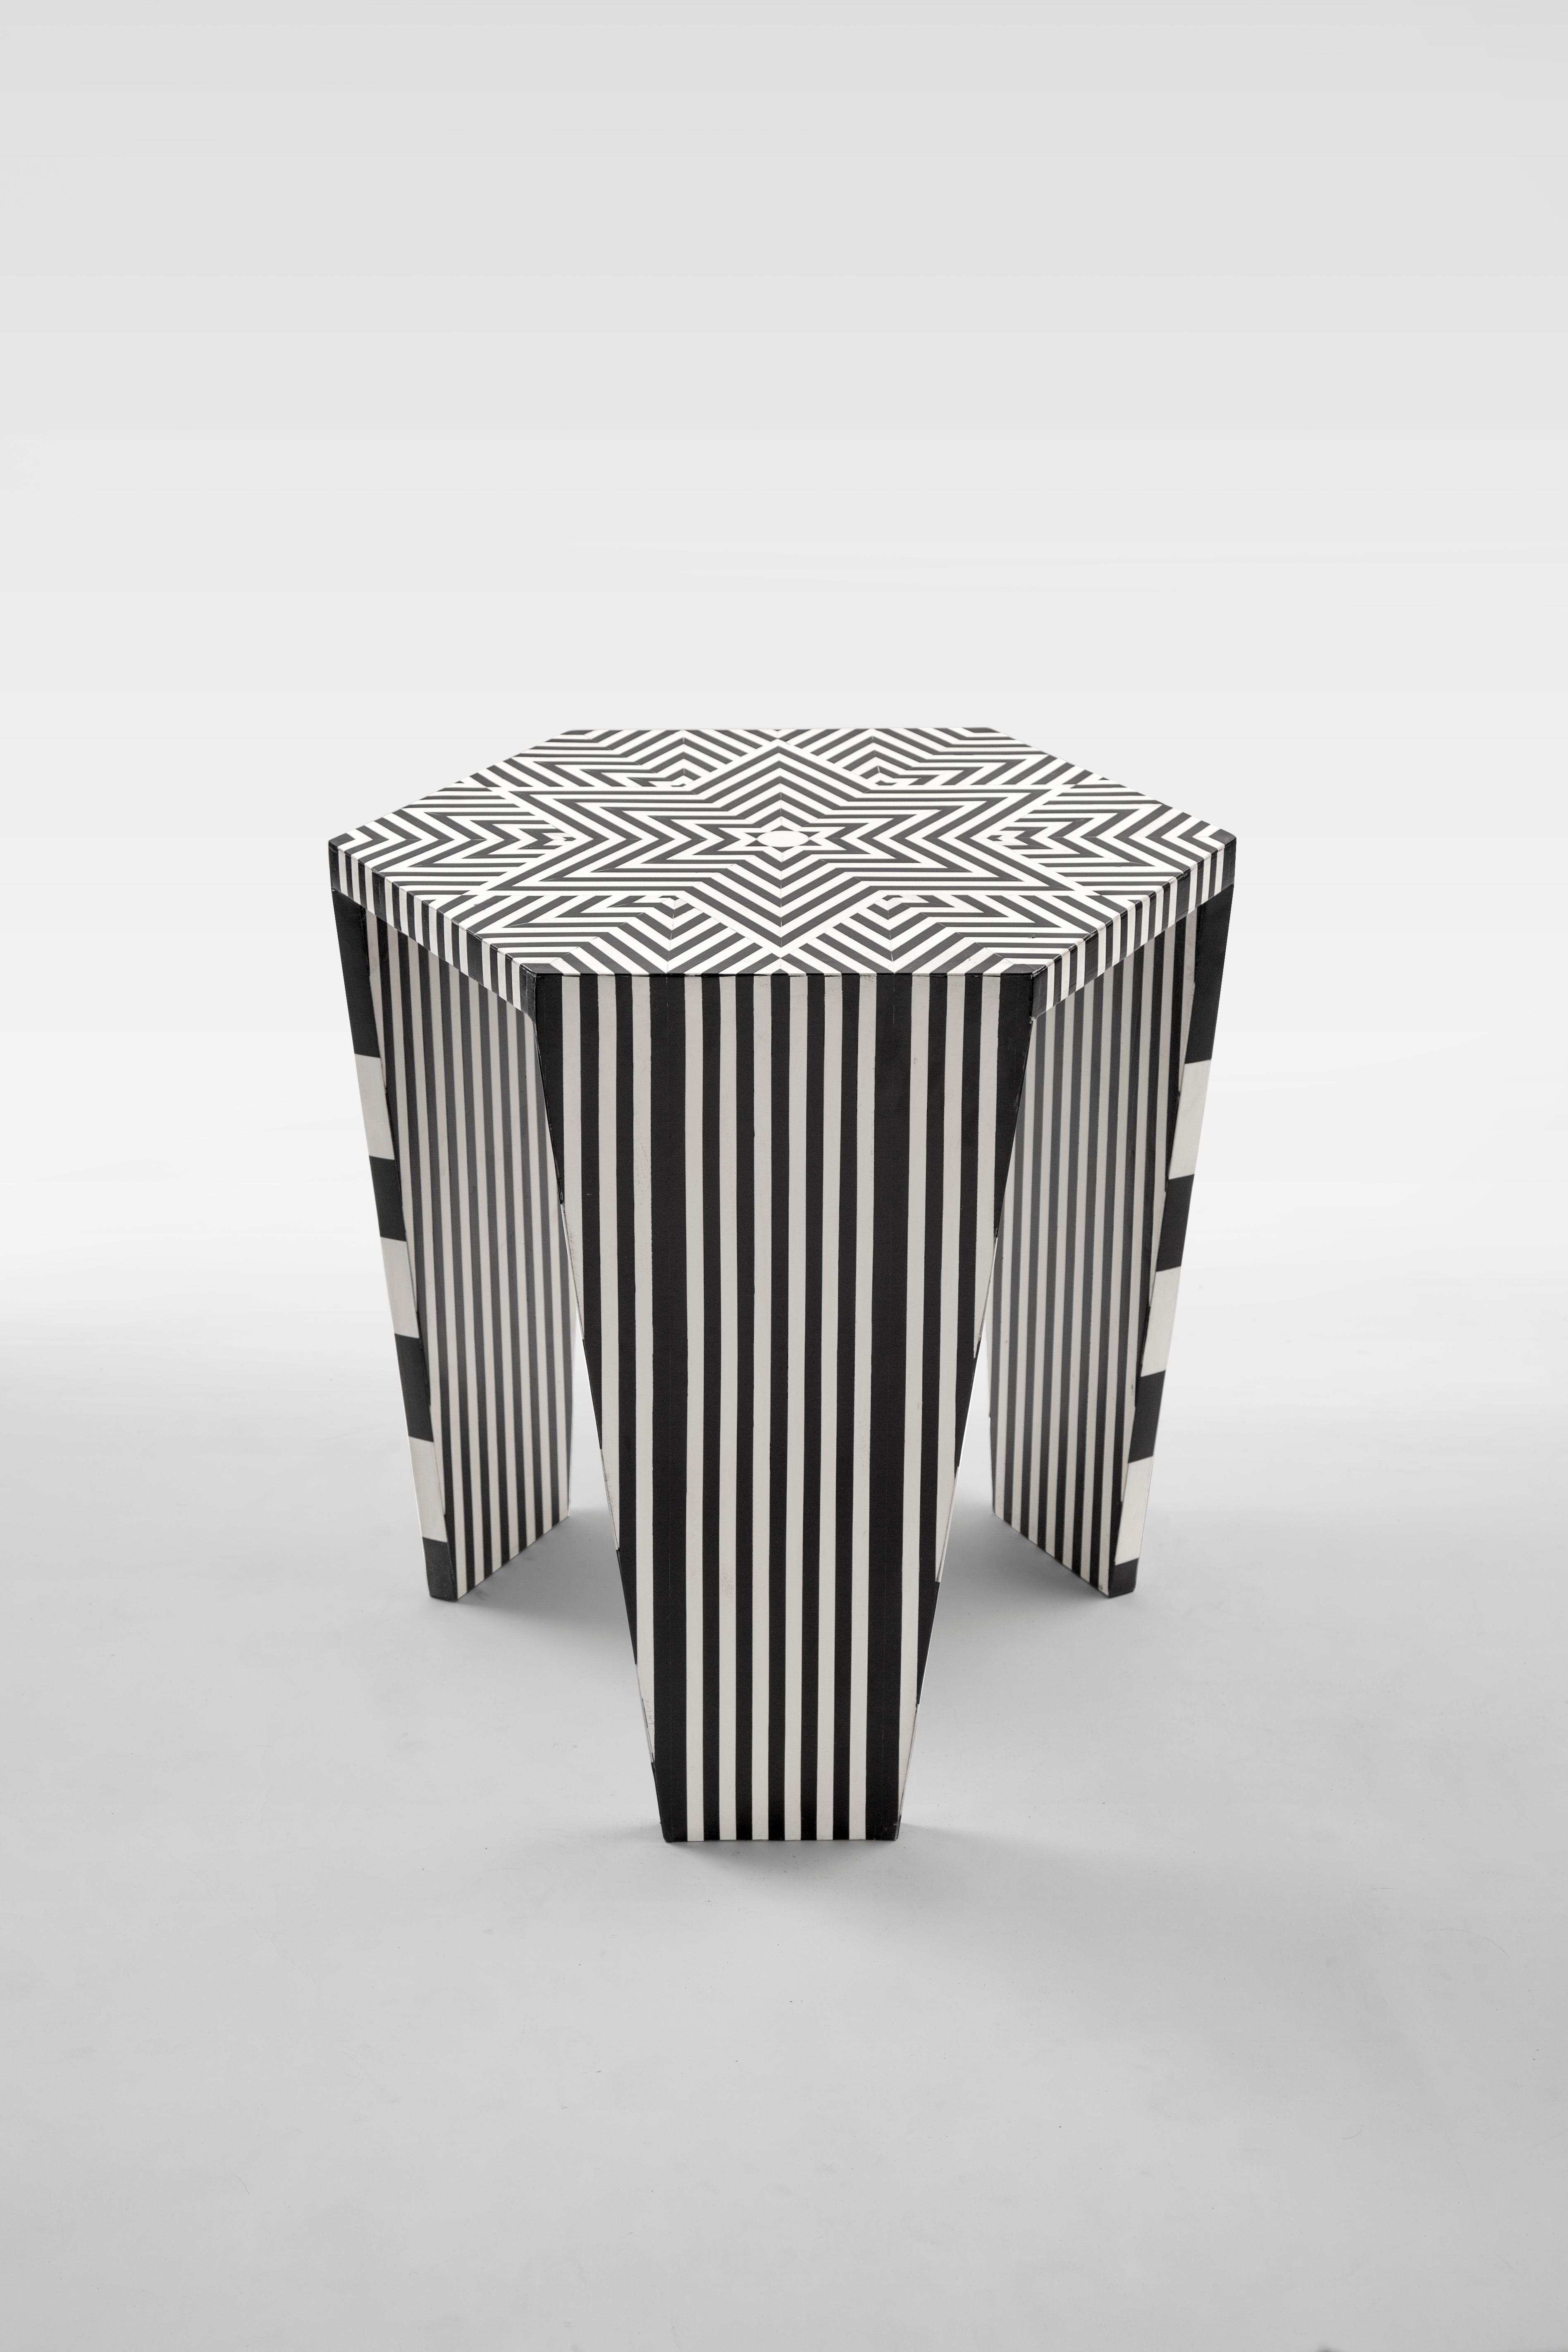 Egyptian Hand-Crafted Side Table with Black & White Star Pattern Made of Acrylic - Small